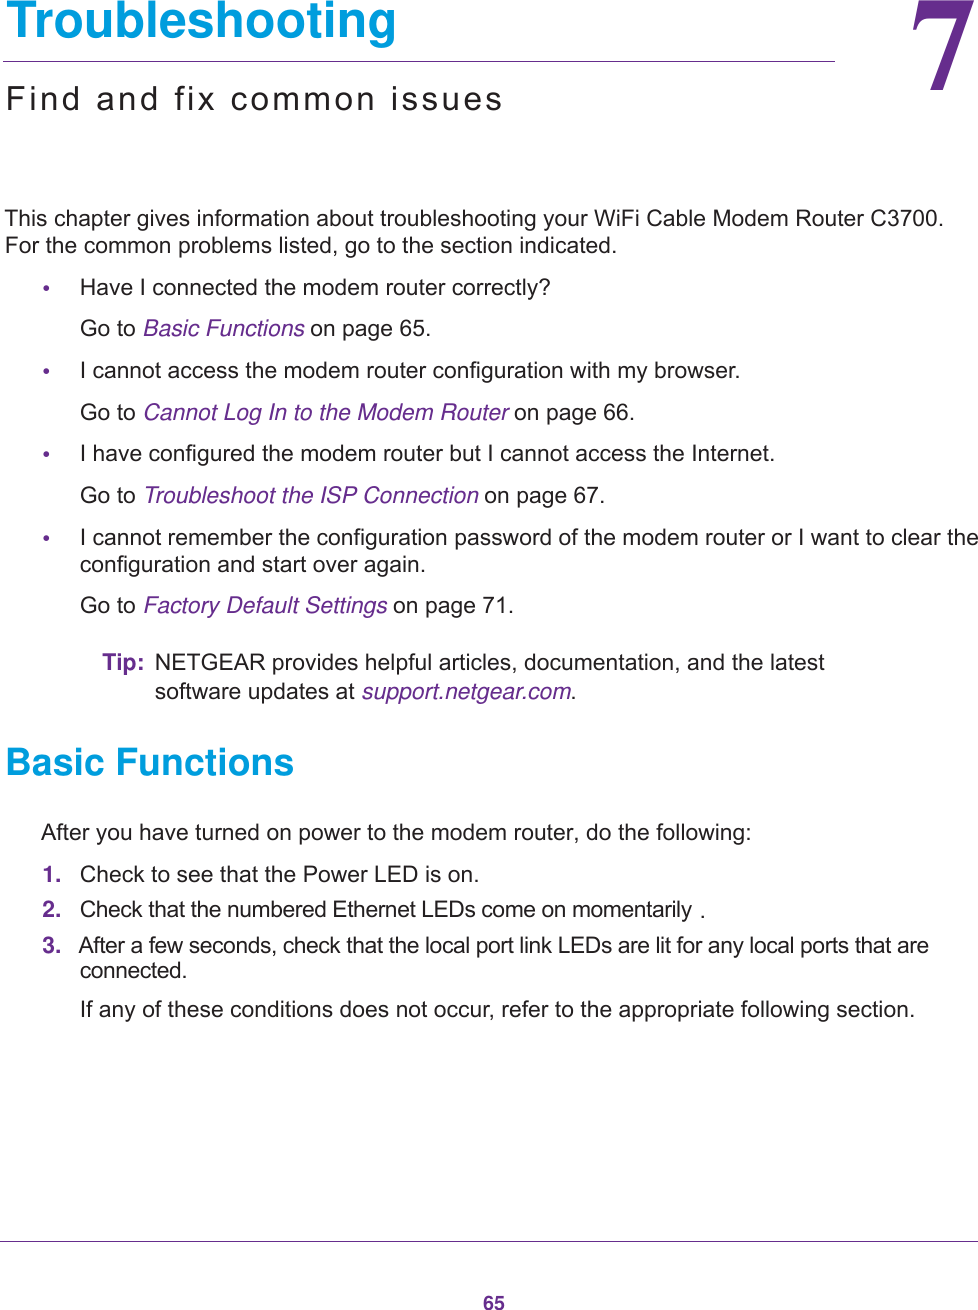 6577.   TroubleshootingFind and fix common issuesThis chapter gives information about troubleshooting your WiFi Cable Modem Router C3700. For the common problems listed, go to the section indicated.•Have I connected the modem router correctly?Go to Basic Functions on page  65.•I cannot access the modem router configuration with my browser.Go to Cannot Log In to the Modem Router on page  66.•I have configured the modem router but I cannot access the Internet.Go to Troubleshoot the ISP Connection on page  67.•I cannot remember the configuration password of the modem router or I want to clear the configuration and start over again.Go to Factory Default Settings on page  71.Tip: NETGEAR provides helpful articles, documentation, and the latest software updates at support.netgear.com.Basic FunctionsAfter you have turned on power to the modem router, do the following:1. Check to see that the Power LED is on.2. Check that the numbered Ethernet LEDs come on momentarily .3. After a few seconds, check that the local port link LEDs are lit for any local ports that are connected.If any of these conditions does not occur, refer to the appropriate following section.